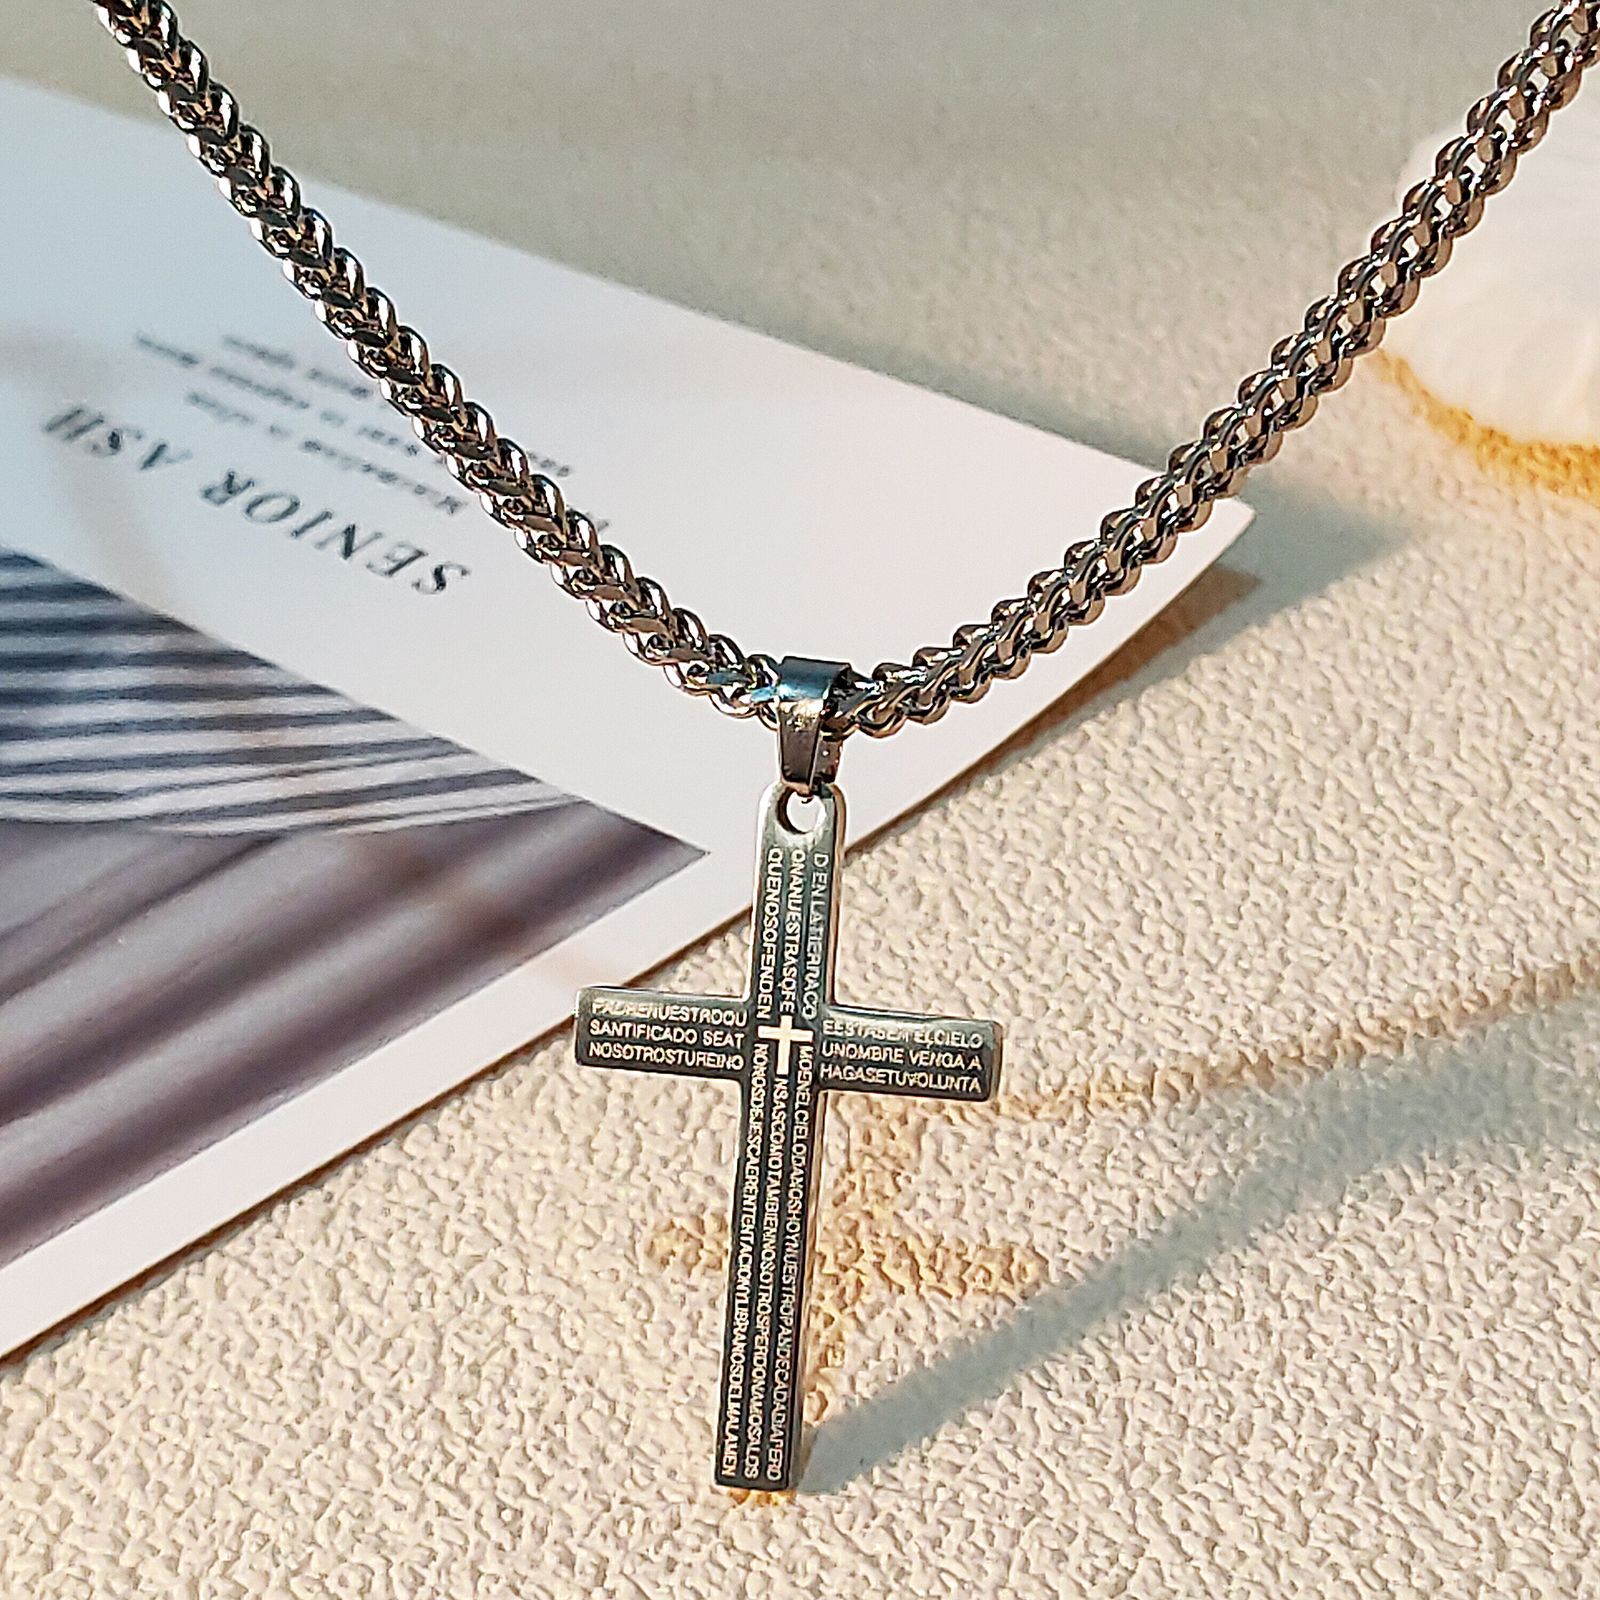 1:Stainless steel cross necklace with reversible chain